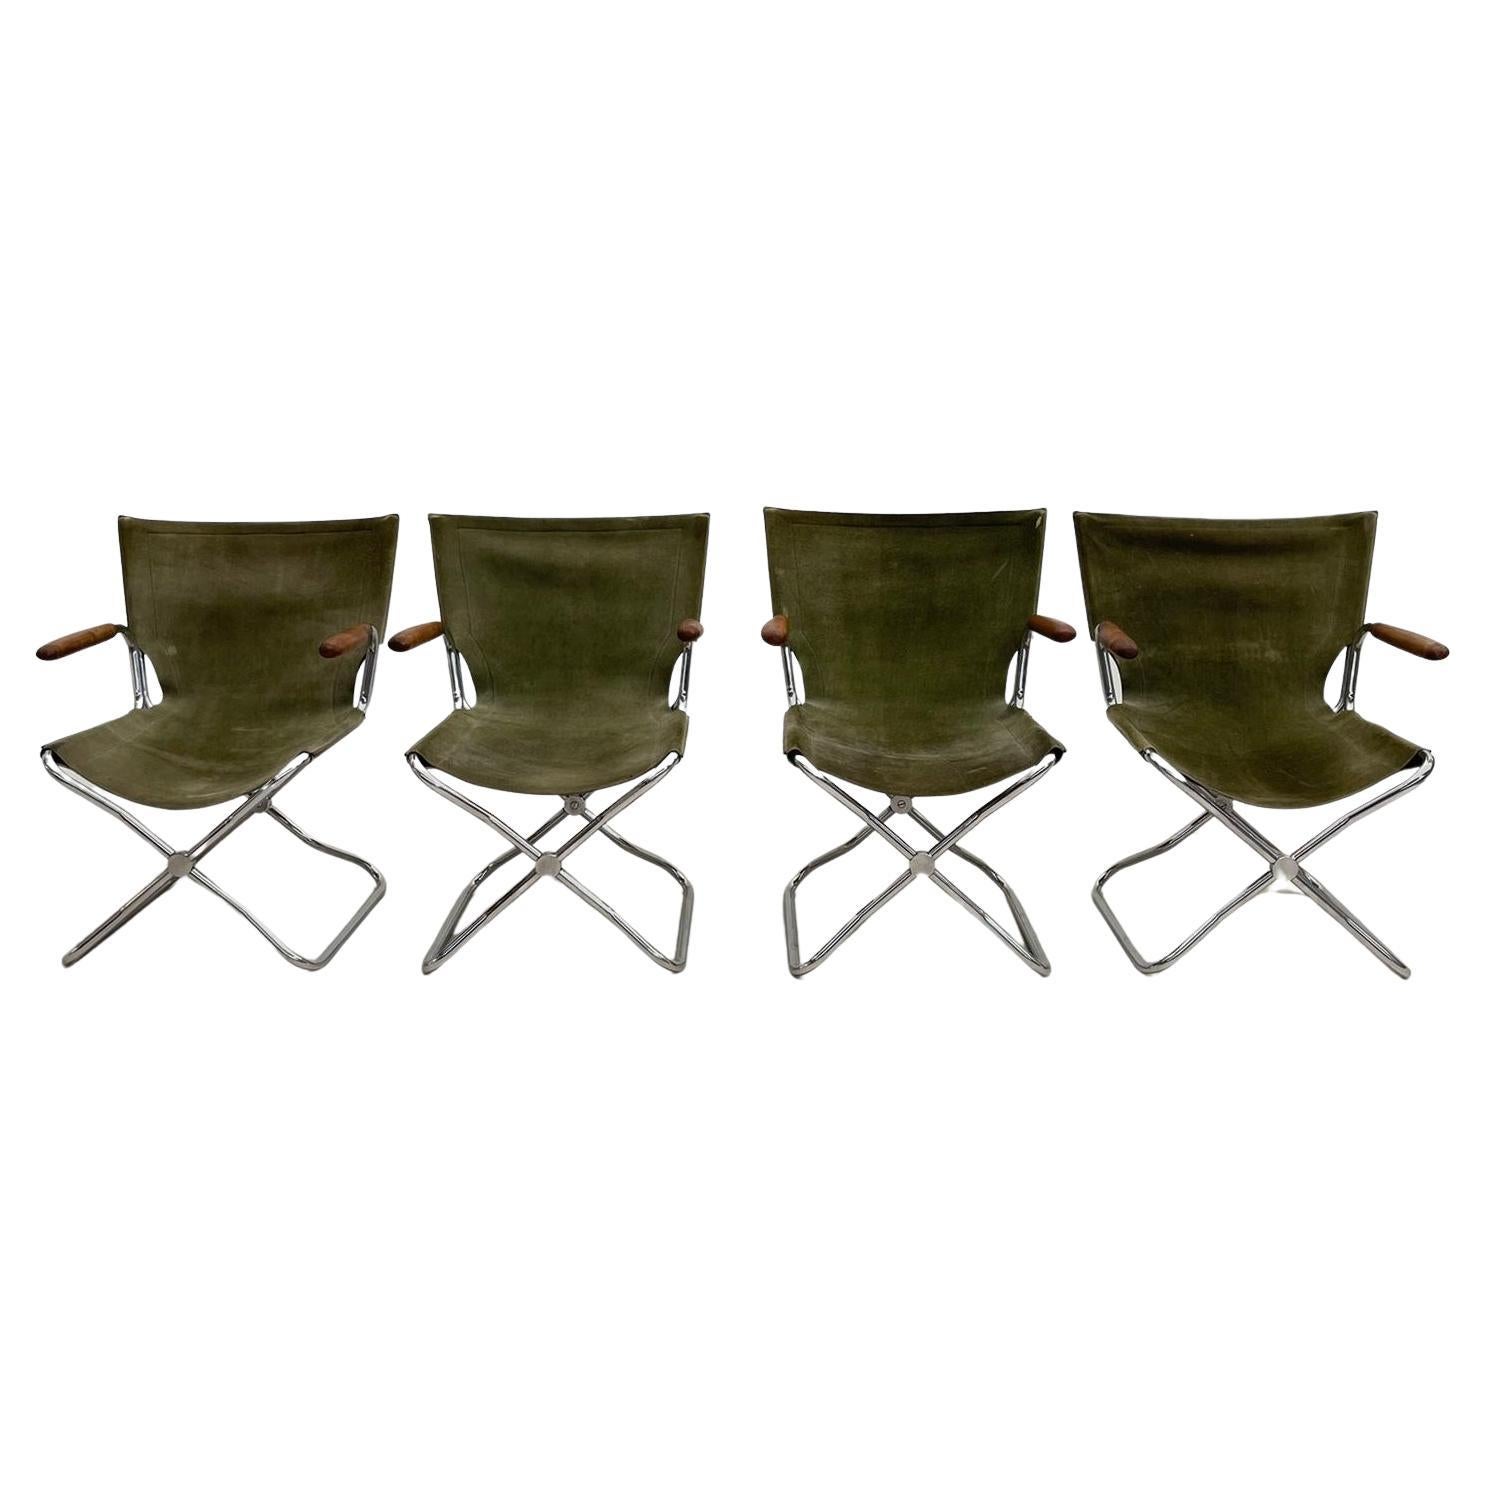 Set of 4 Mid-Century Wood Metal and Green Canvas Folding Armchairs